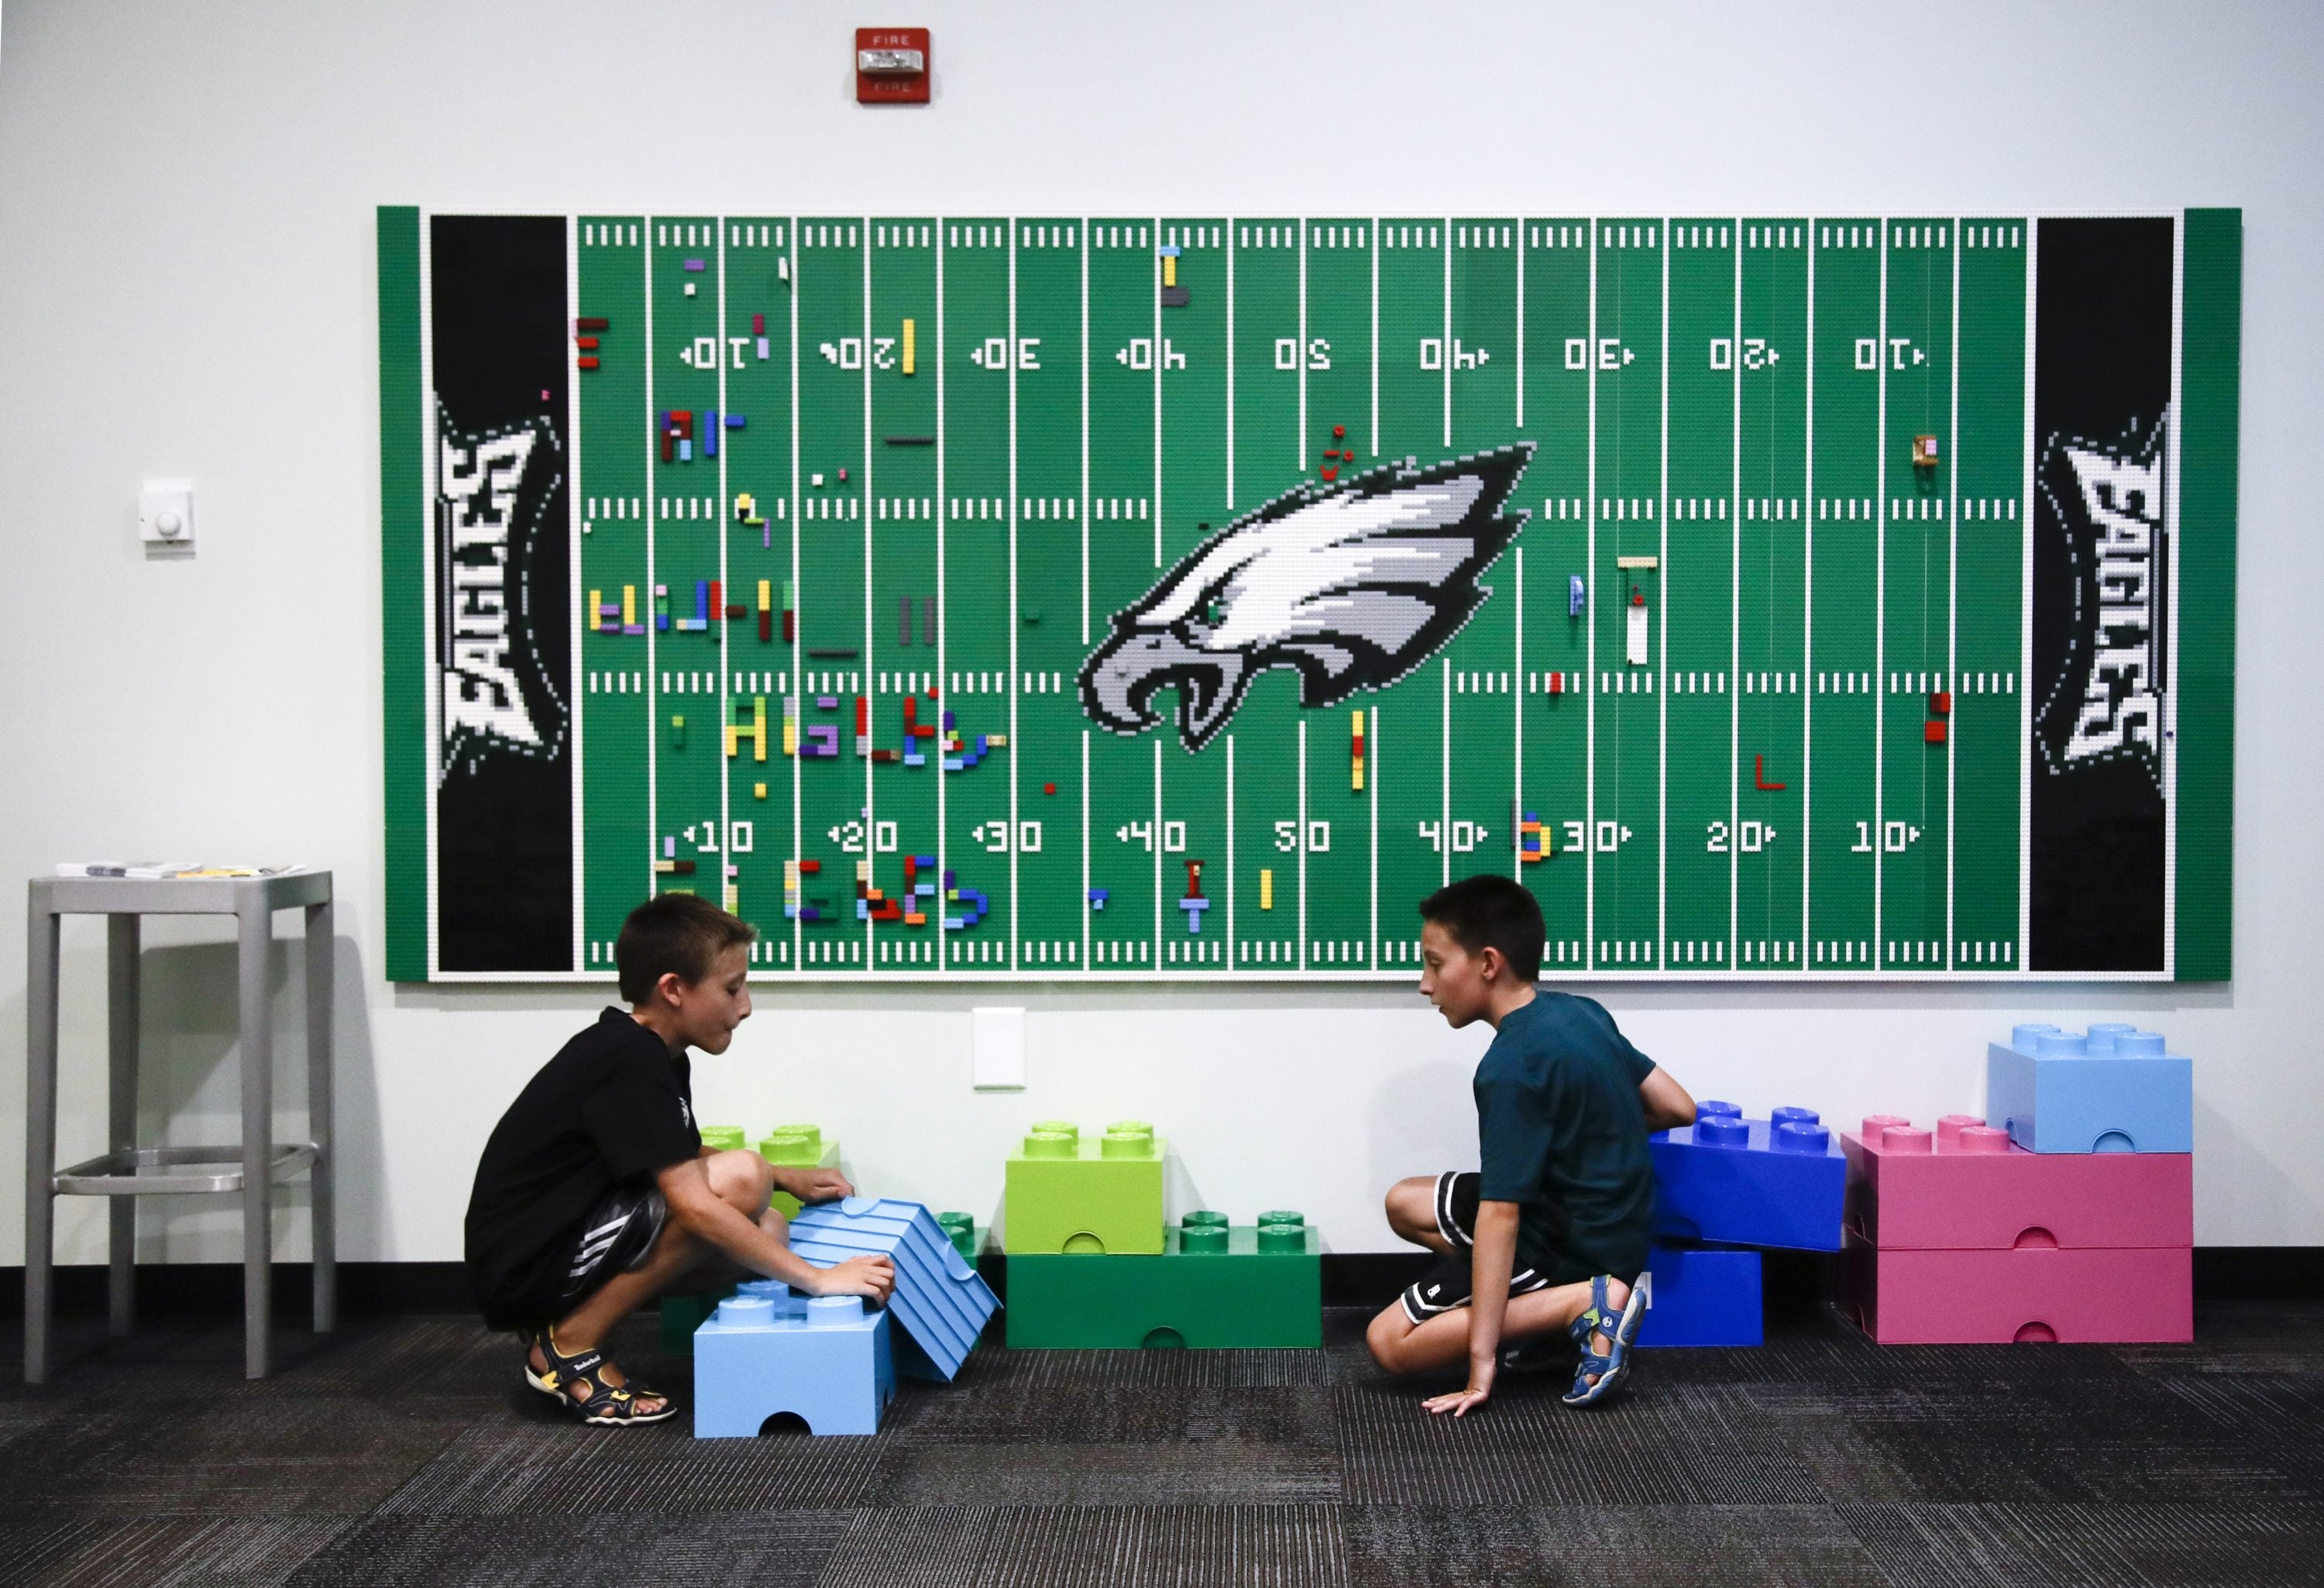 Eagles turn stadium into vaccine site for autism community - WHYY